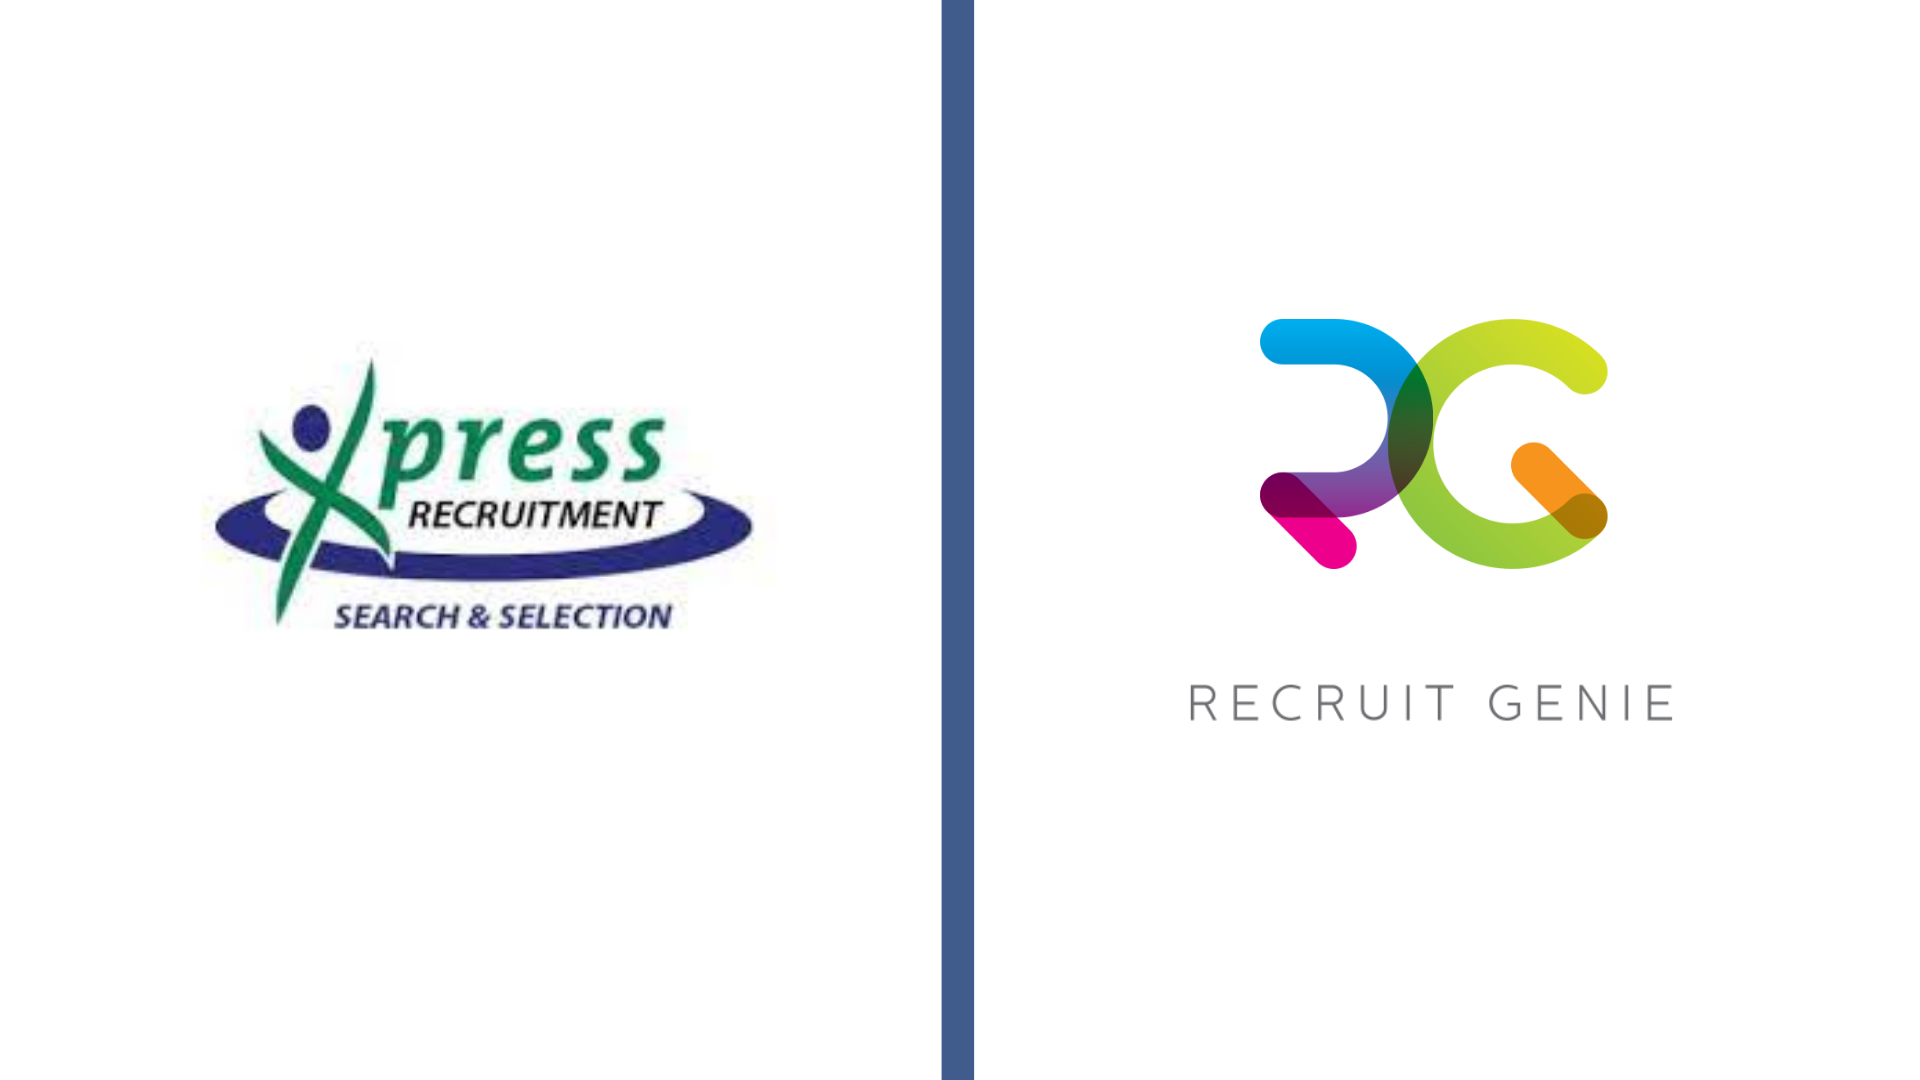 Xpress Recruitment and Recruit Genie are Part of Our story